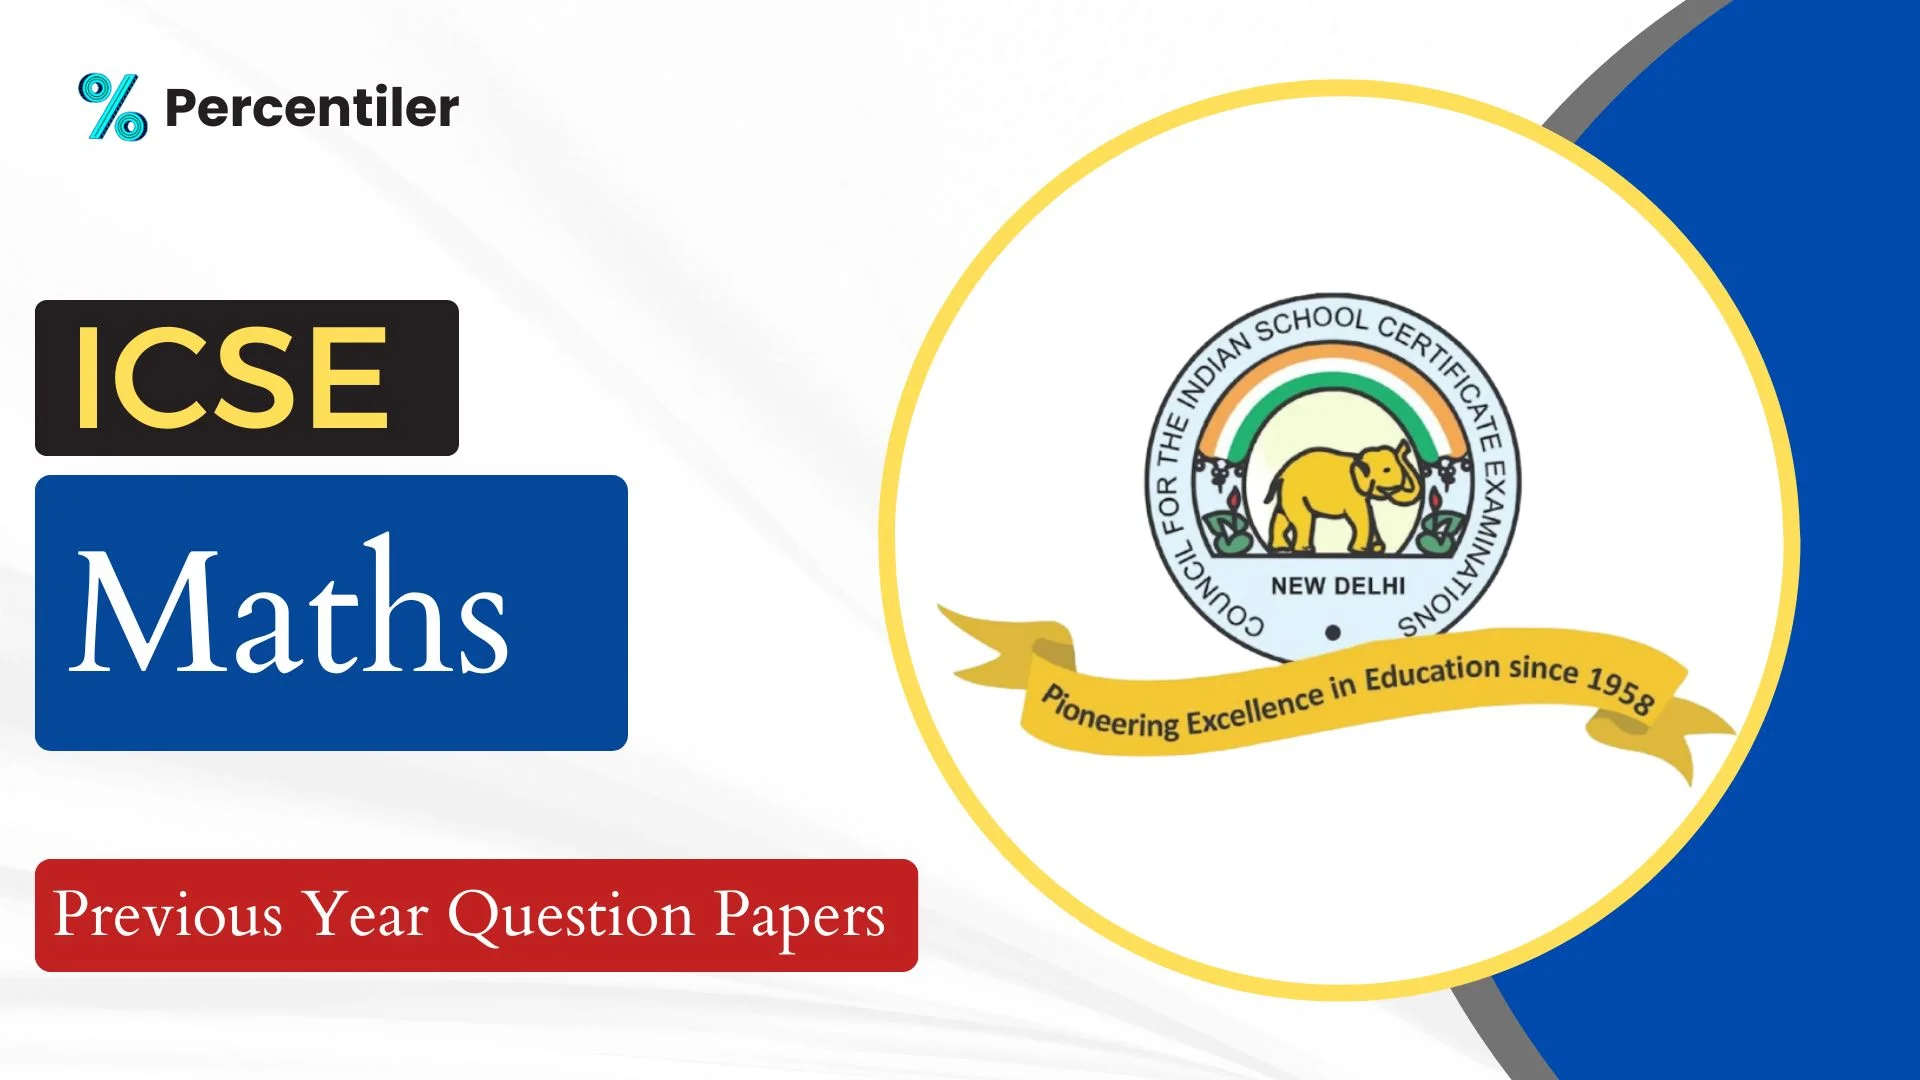 ICSE Maths Previous Year Question Papers